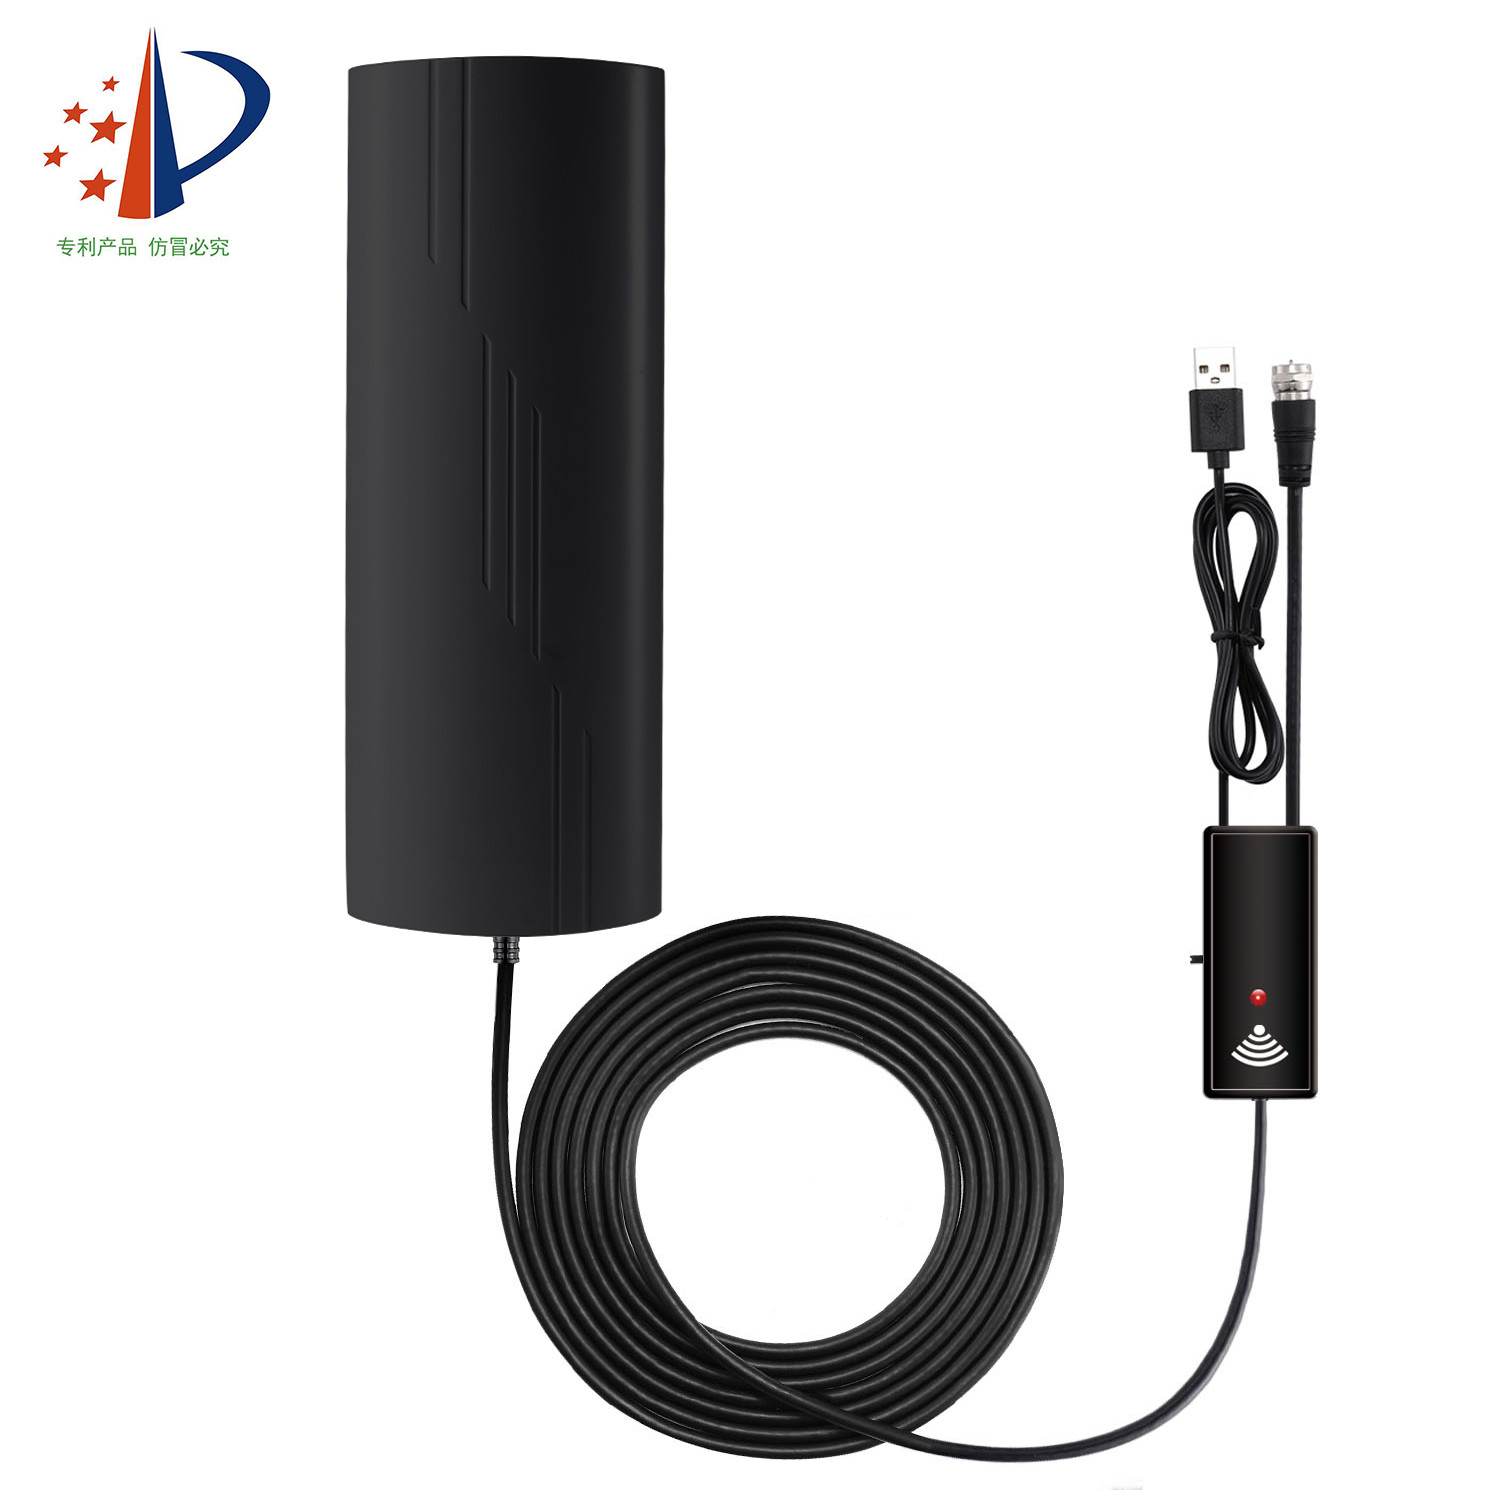  waterproof 5m Cable 20mA 470MHz 25dBi Indoor TV Antenna Manufactures